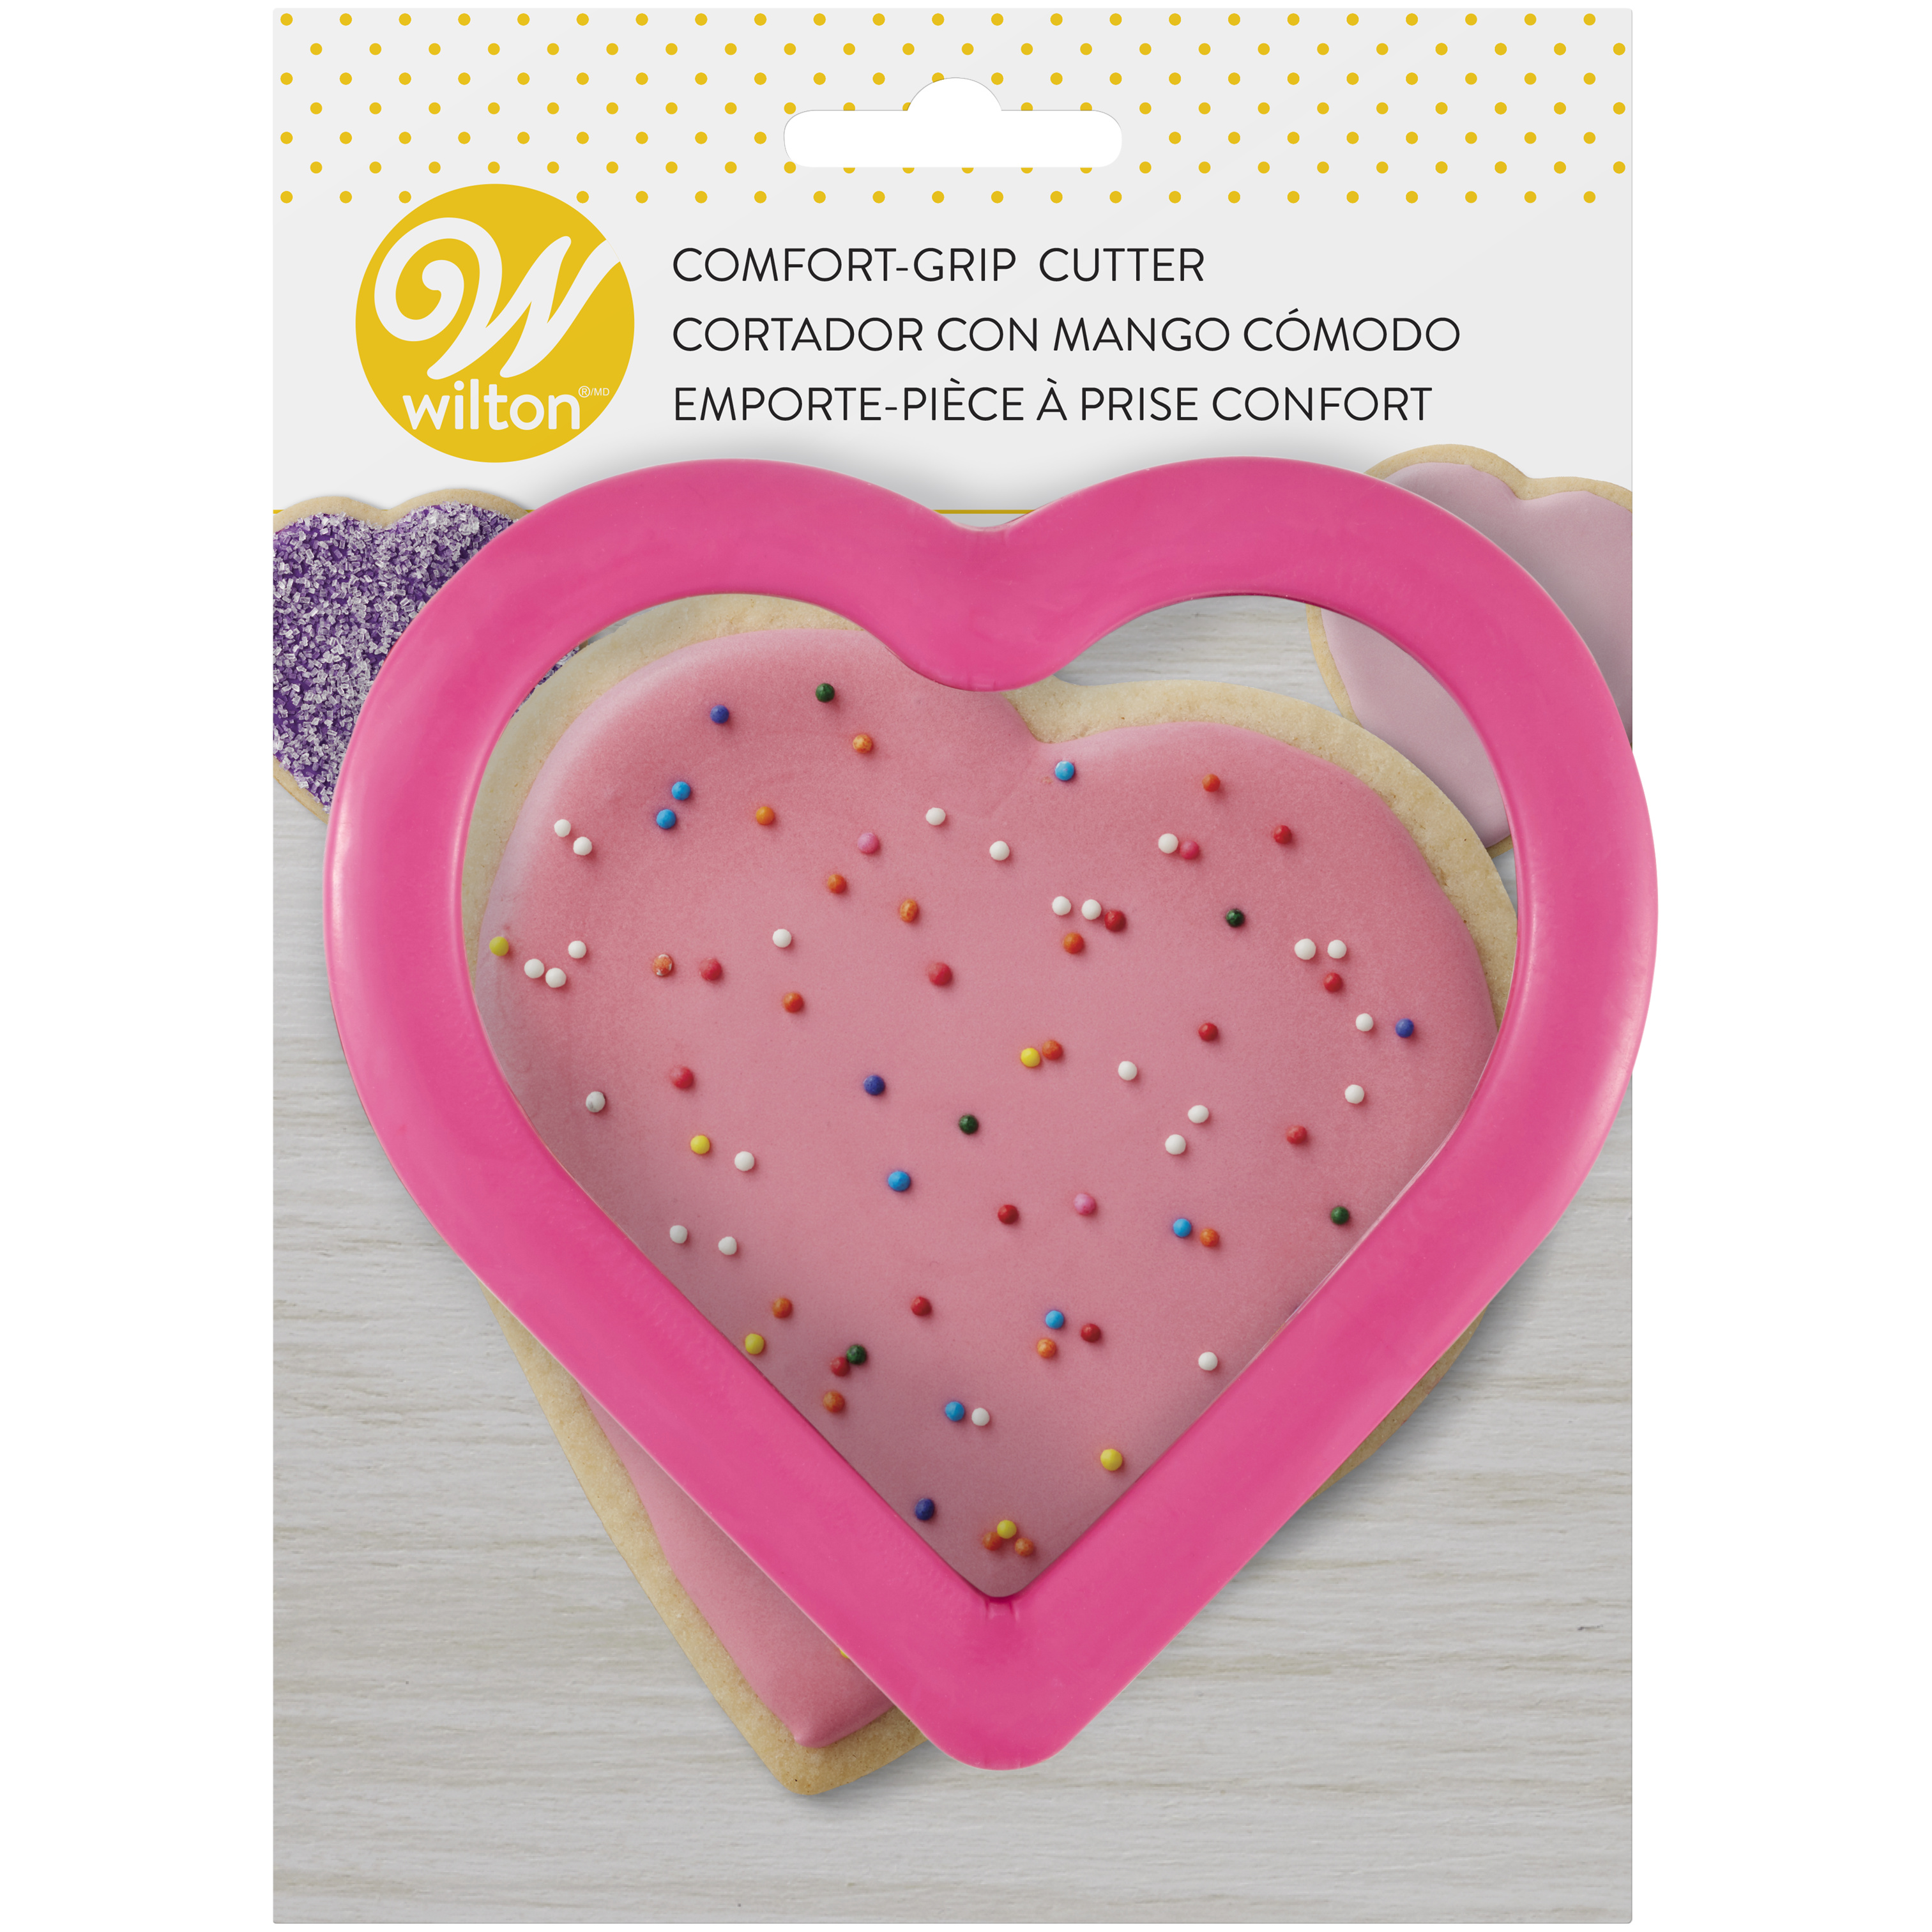 Wilton Large Heart Comfort-Grip Cookie Cutter - image 2 of 2